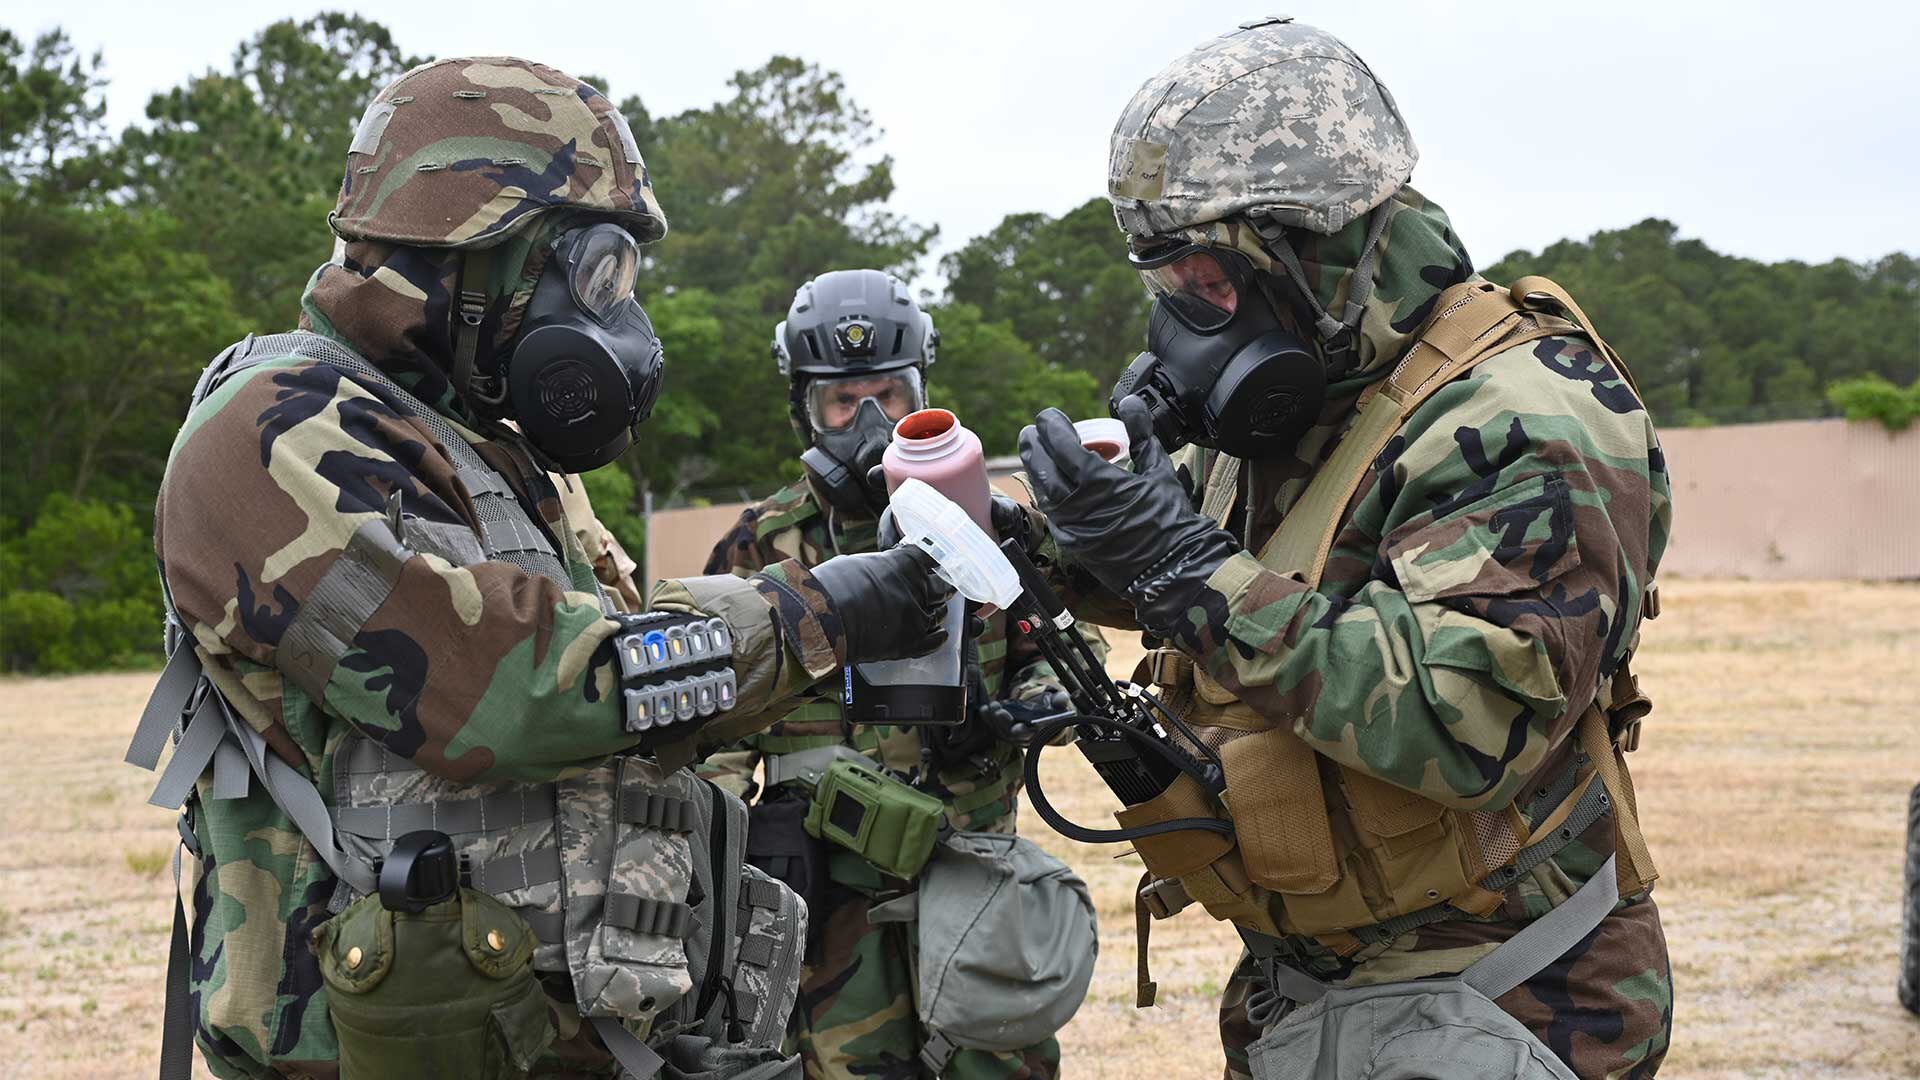 Joint Forces team members prepare the "Sprayable Slurry" demonstration at a decontamination station. The photo, taken at the 2021 CBOA,  showcases the many technological advances, prototypes, and DTRA's capabilities.